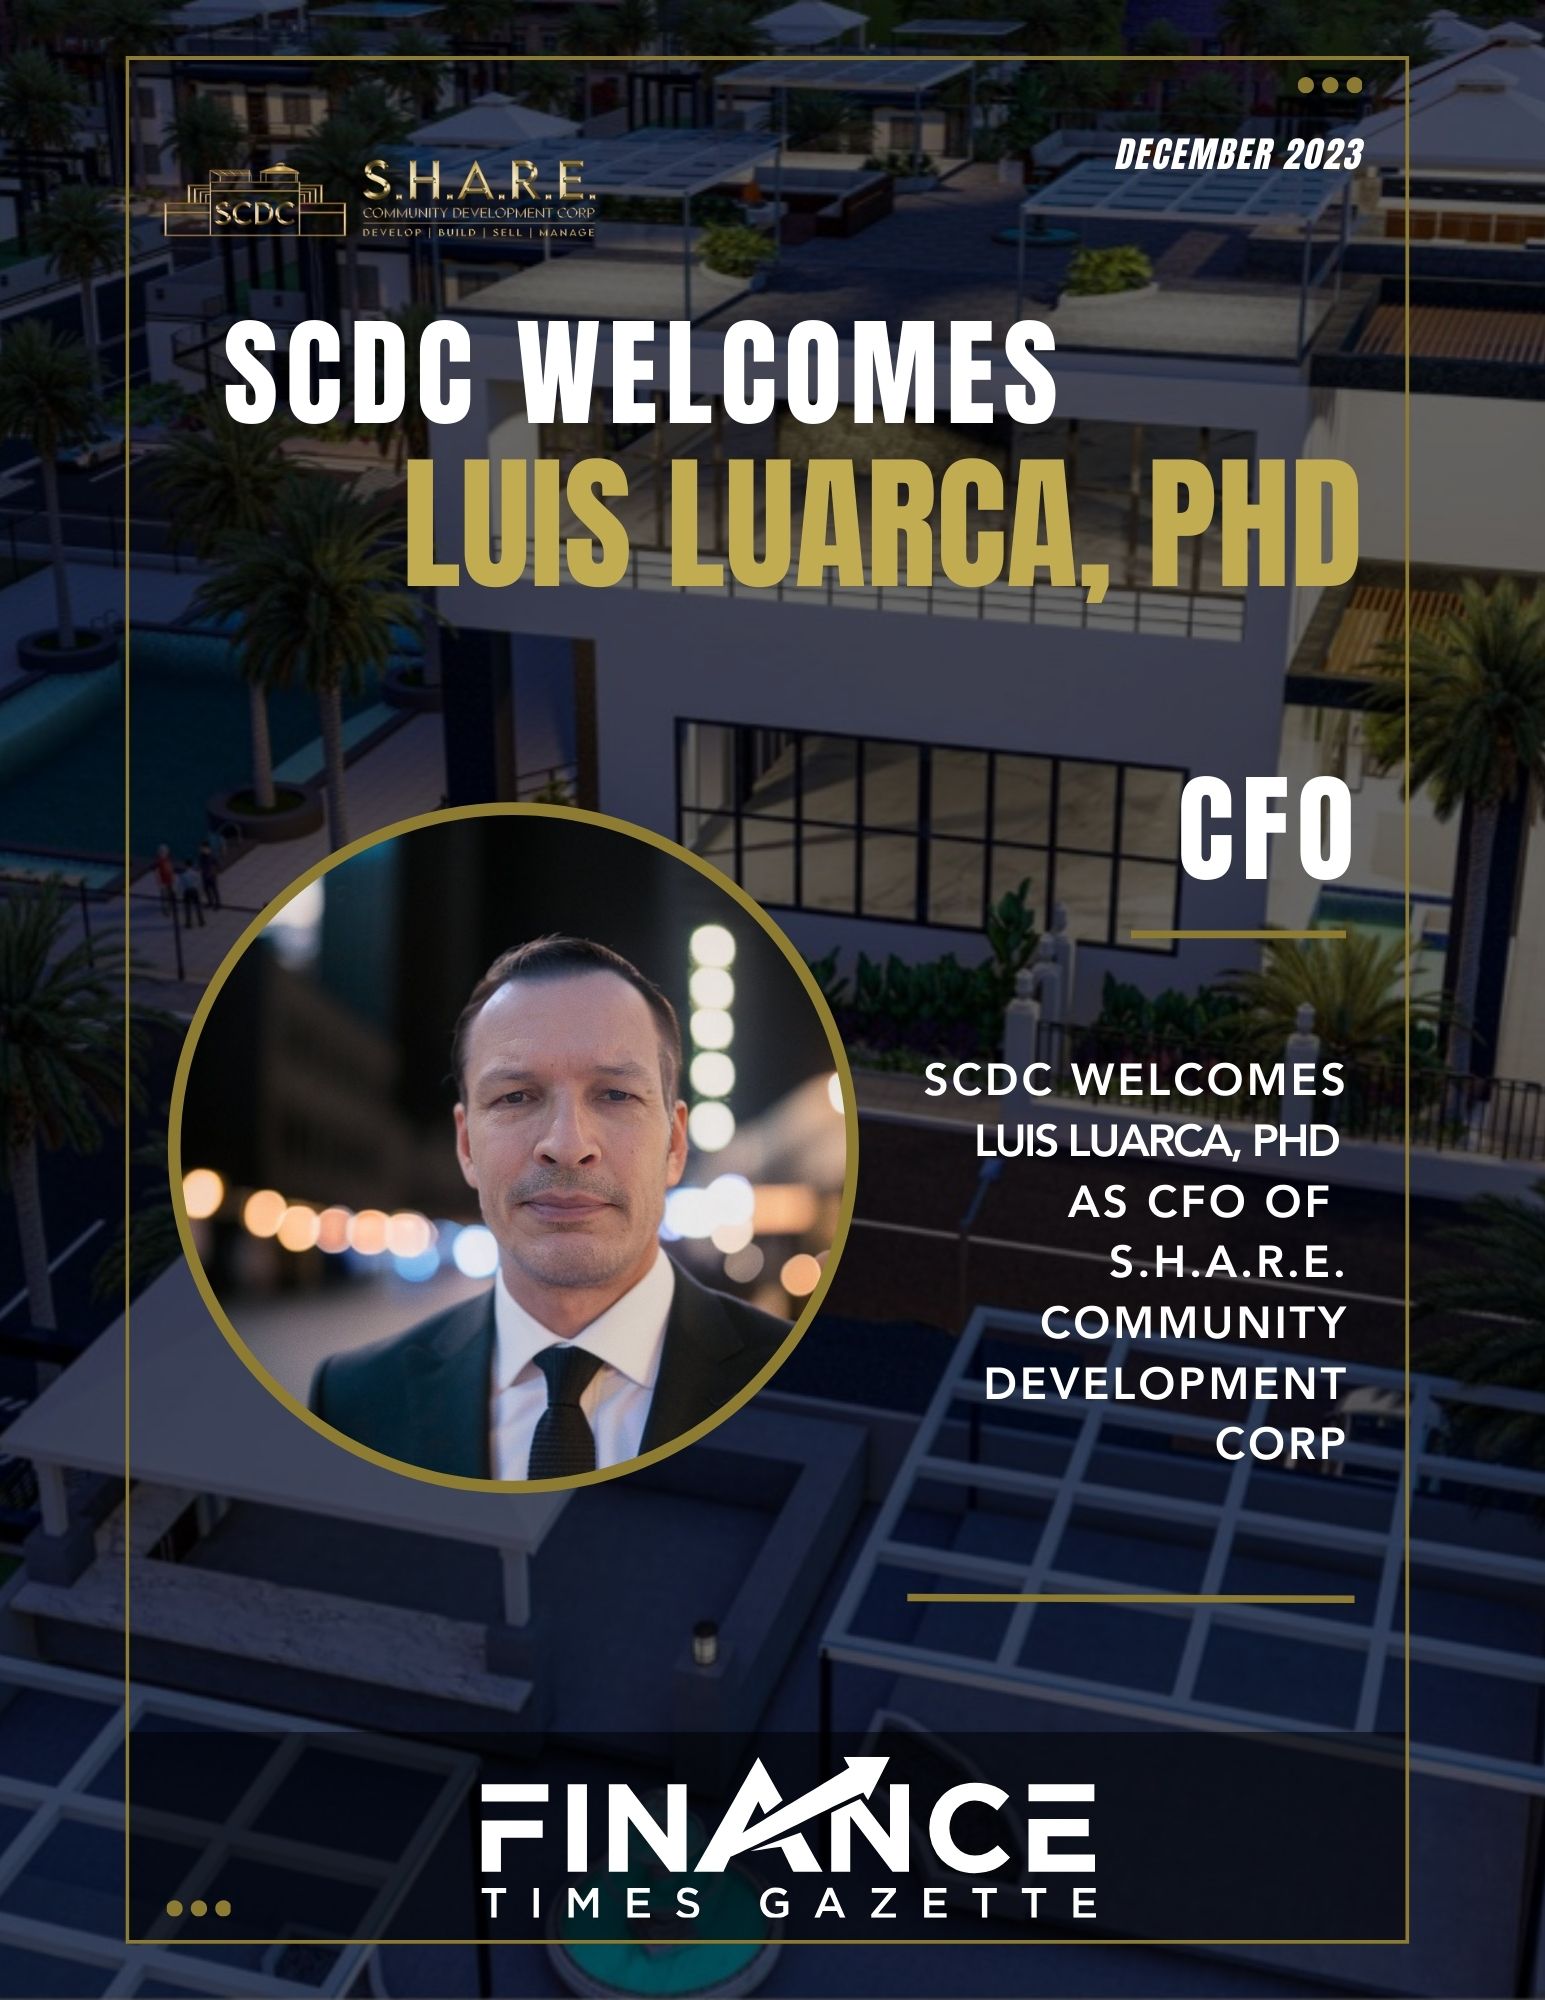 SCDC Welcomes Luis Luarca PhD as CFO, Setting Visionary Course for Financial Growth